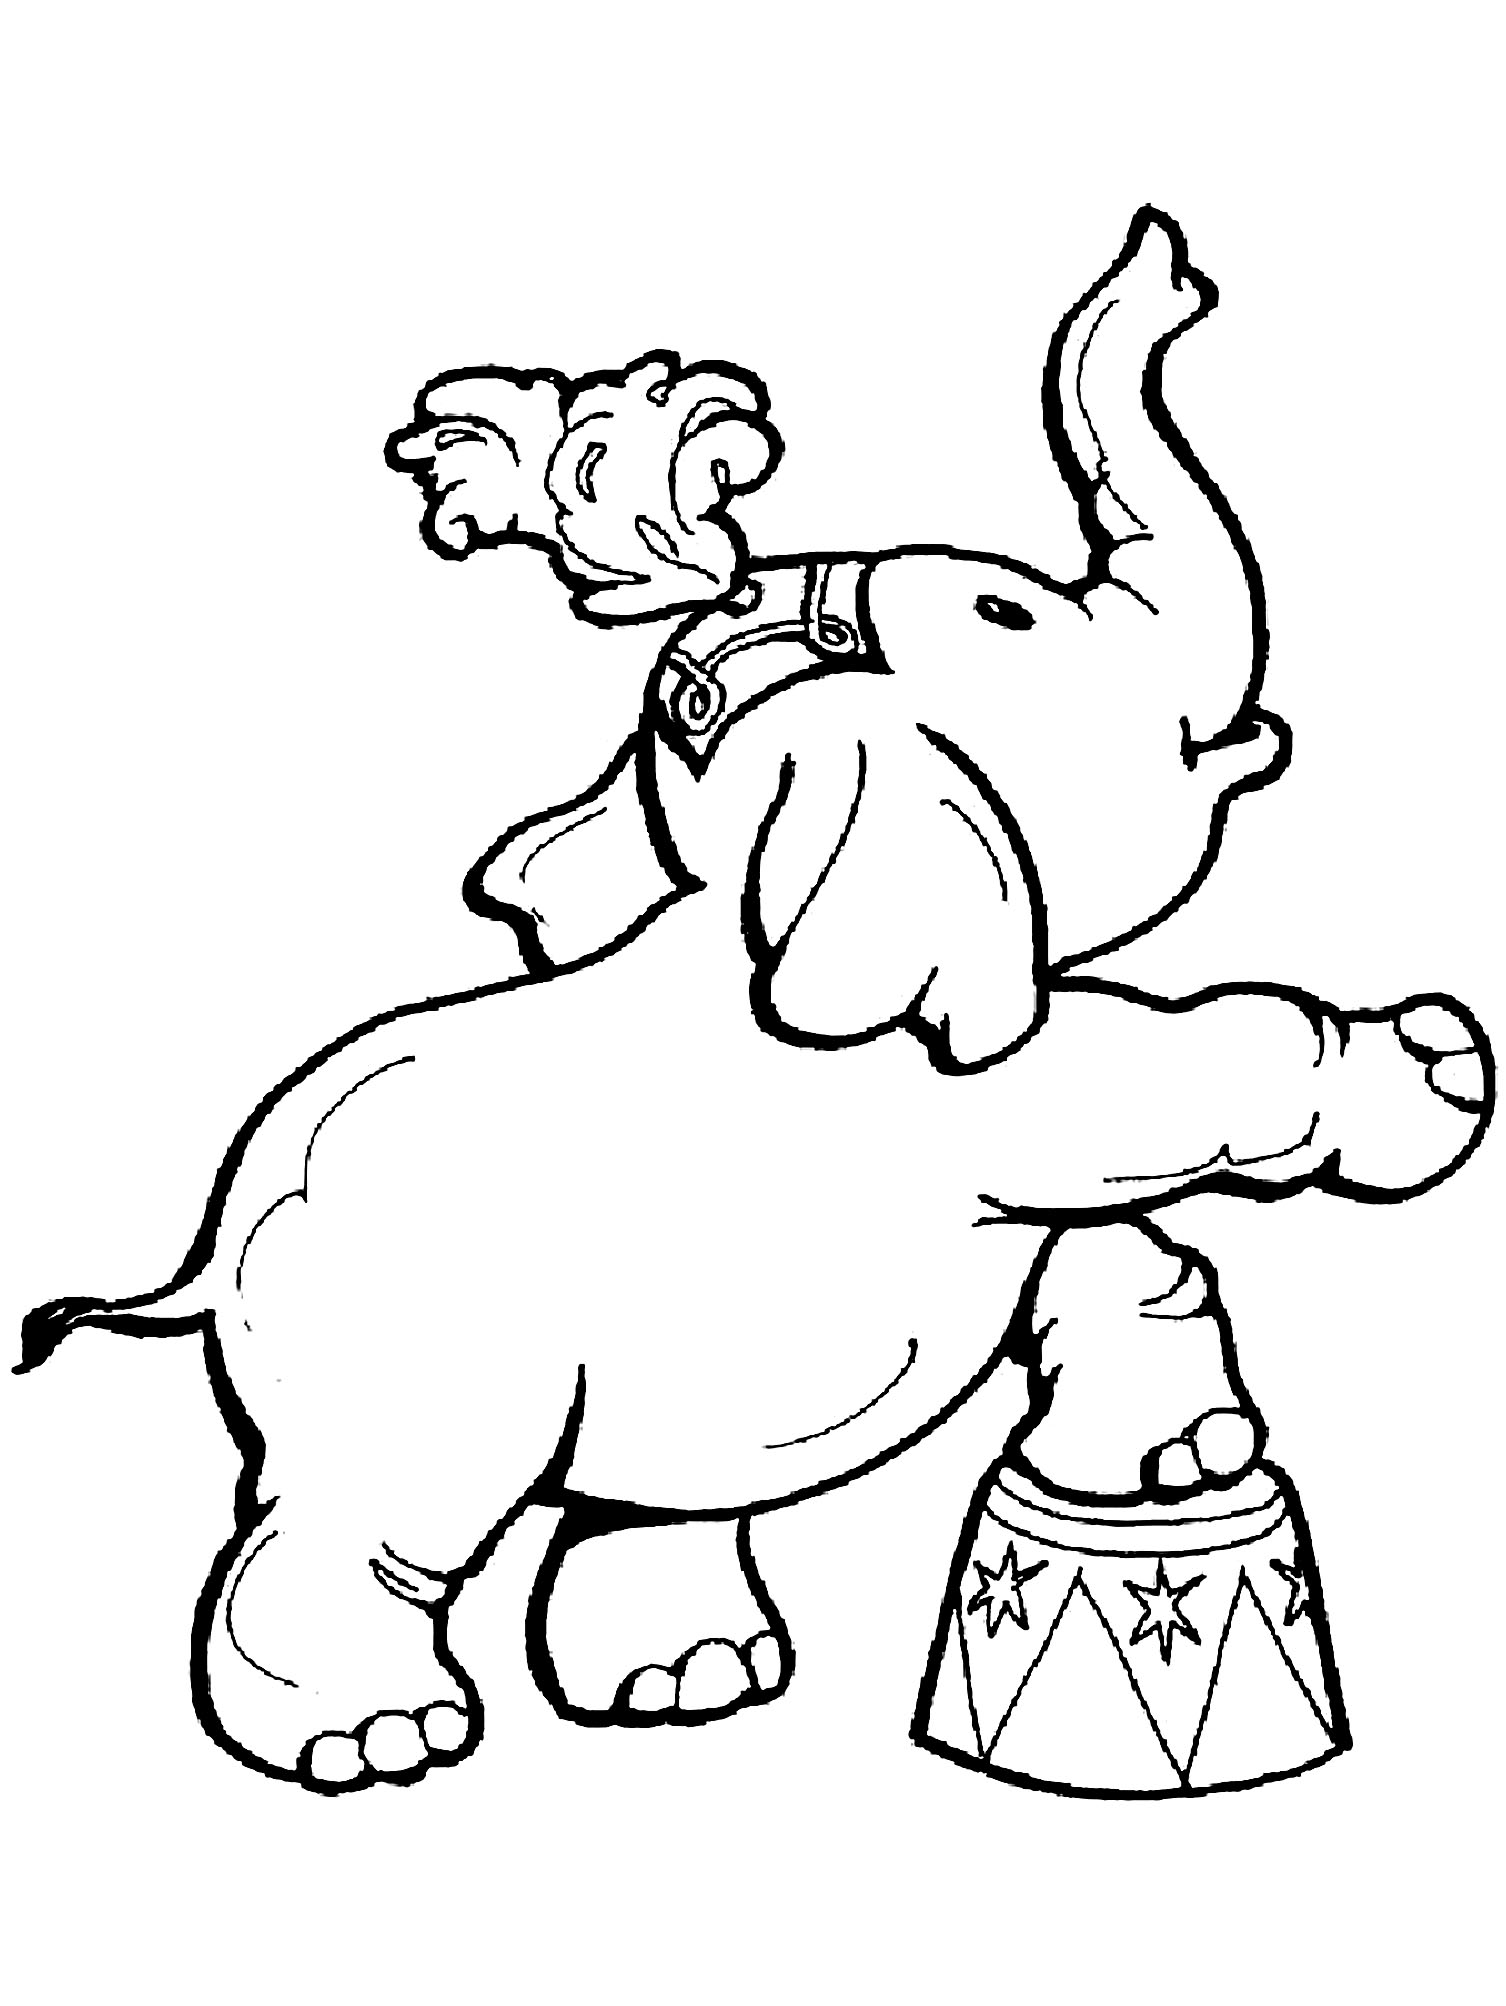 circus elephant coloring pages